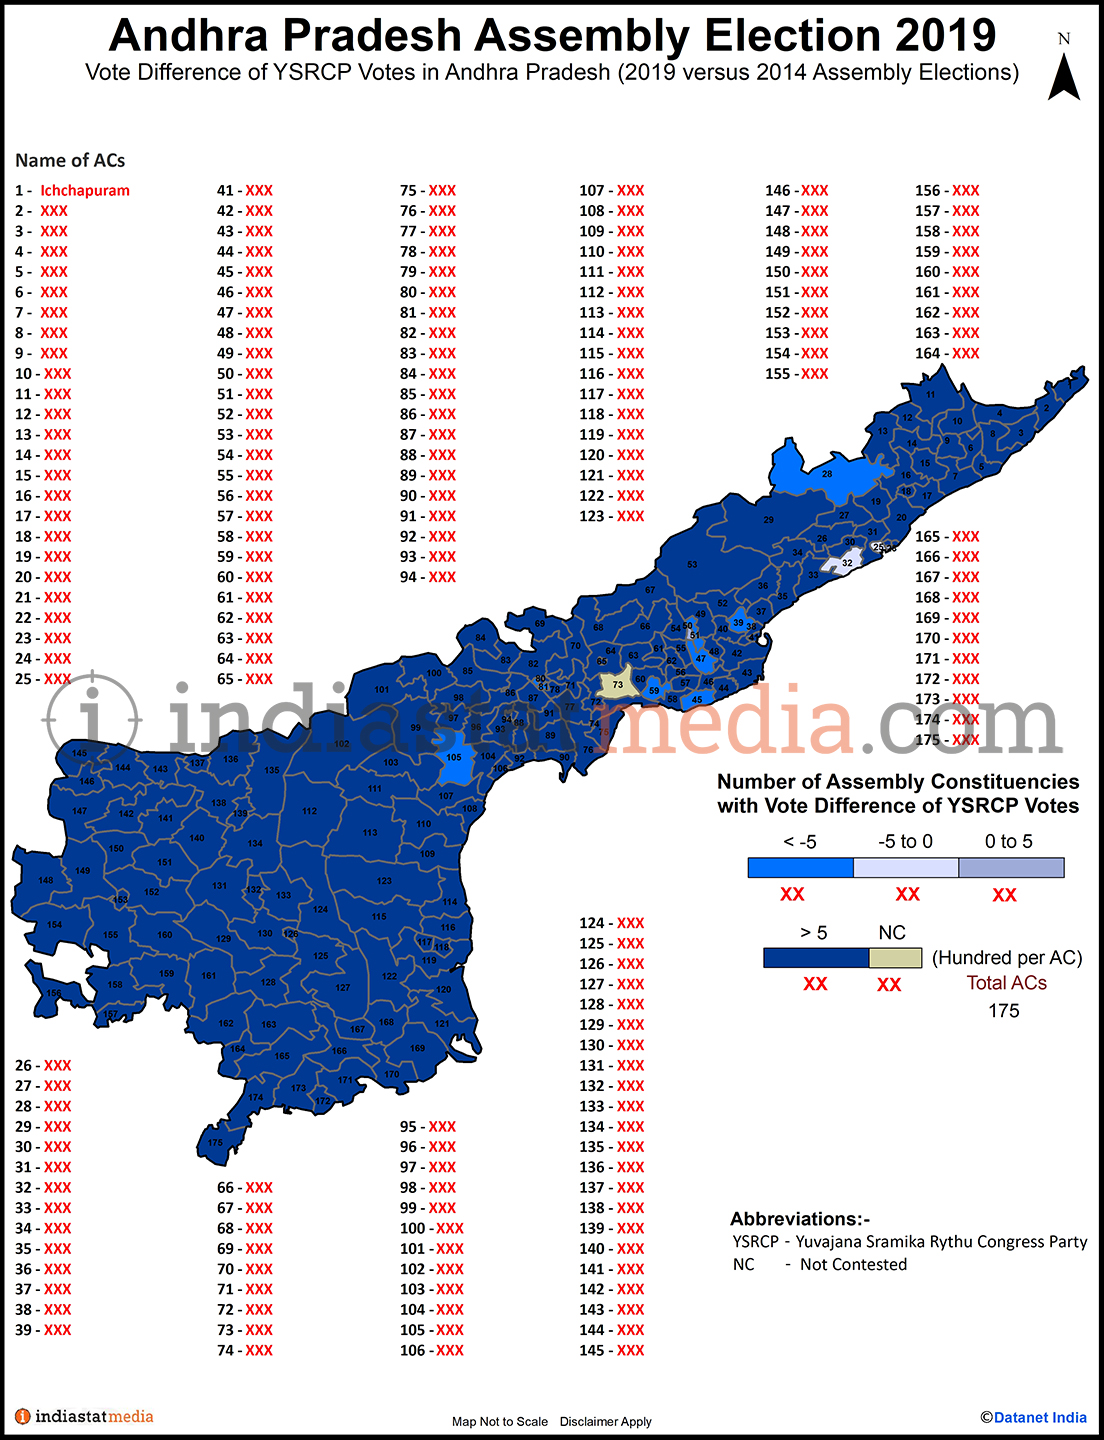 Assembly Constituencies with Vote Difference of YSRCP Votes in Andhra Pradesh (Assembly Elections - 2014 & 2019)